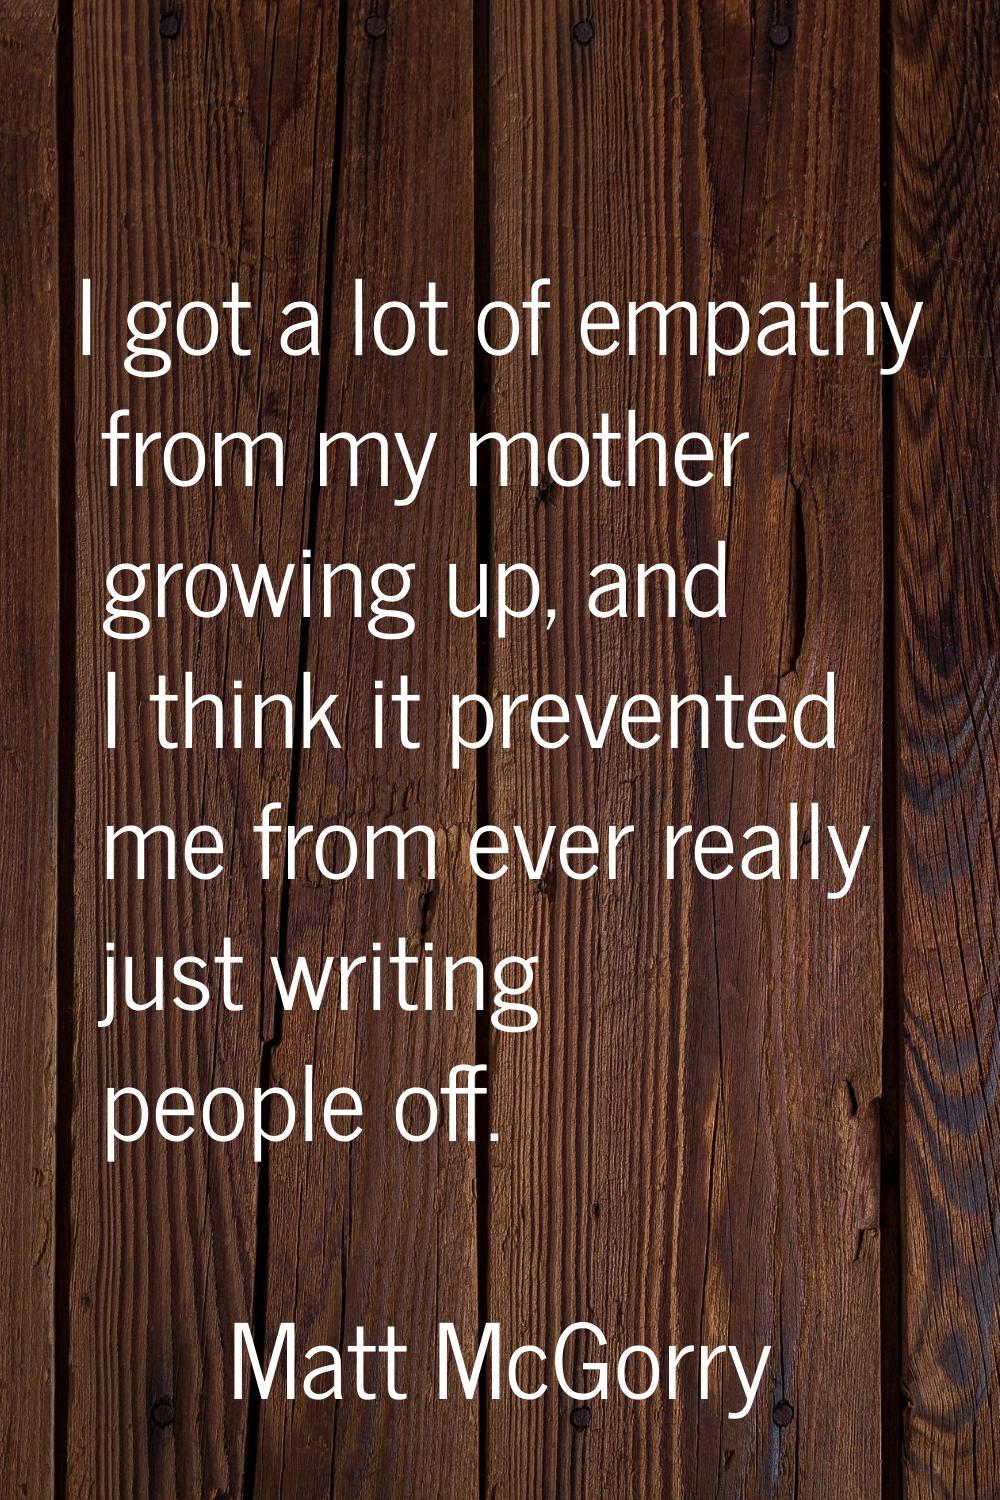 I got a lot of empathy from my mother growing up, and I think it prevented me from ever really just